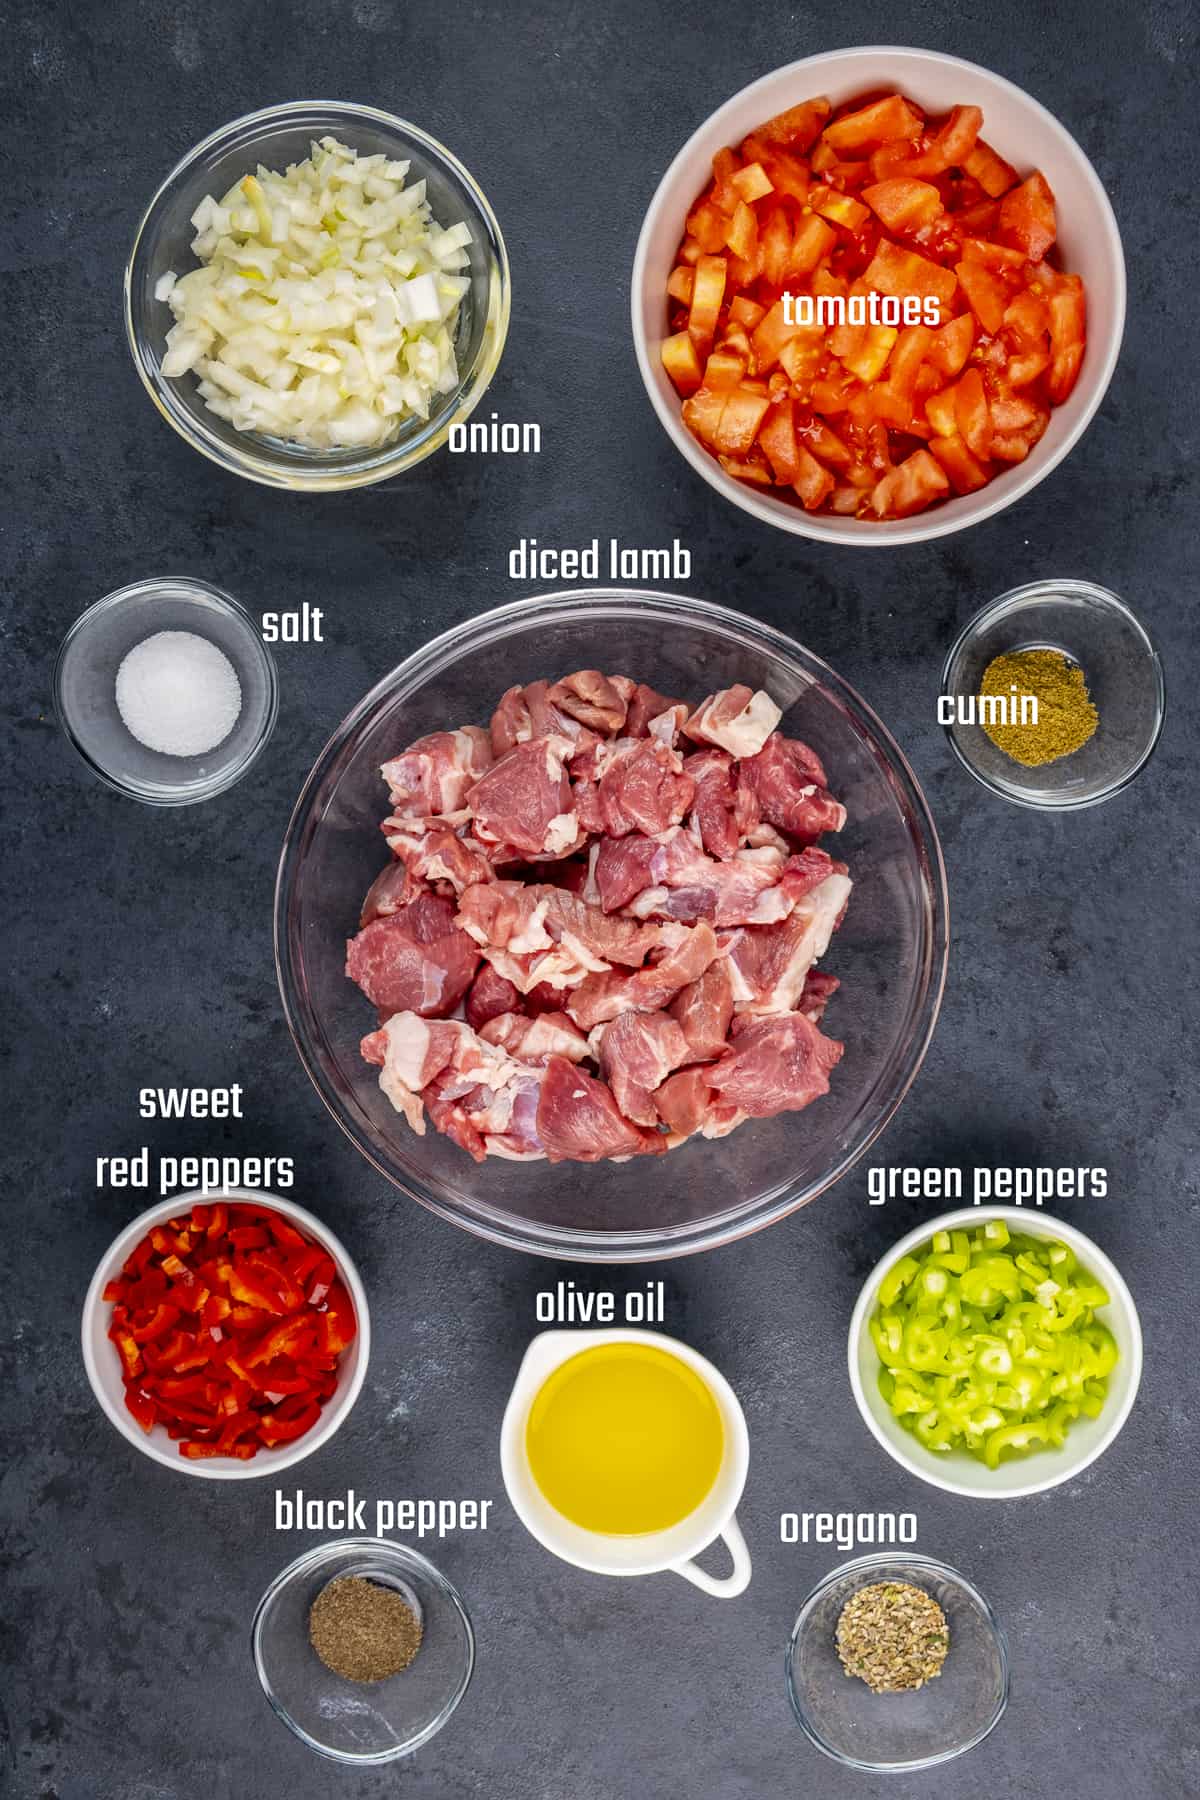 Diced lamb, chopped tomatoes, peppers, onion, olive oil, salt, pepper, cumin and oregano on a black backdrop.